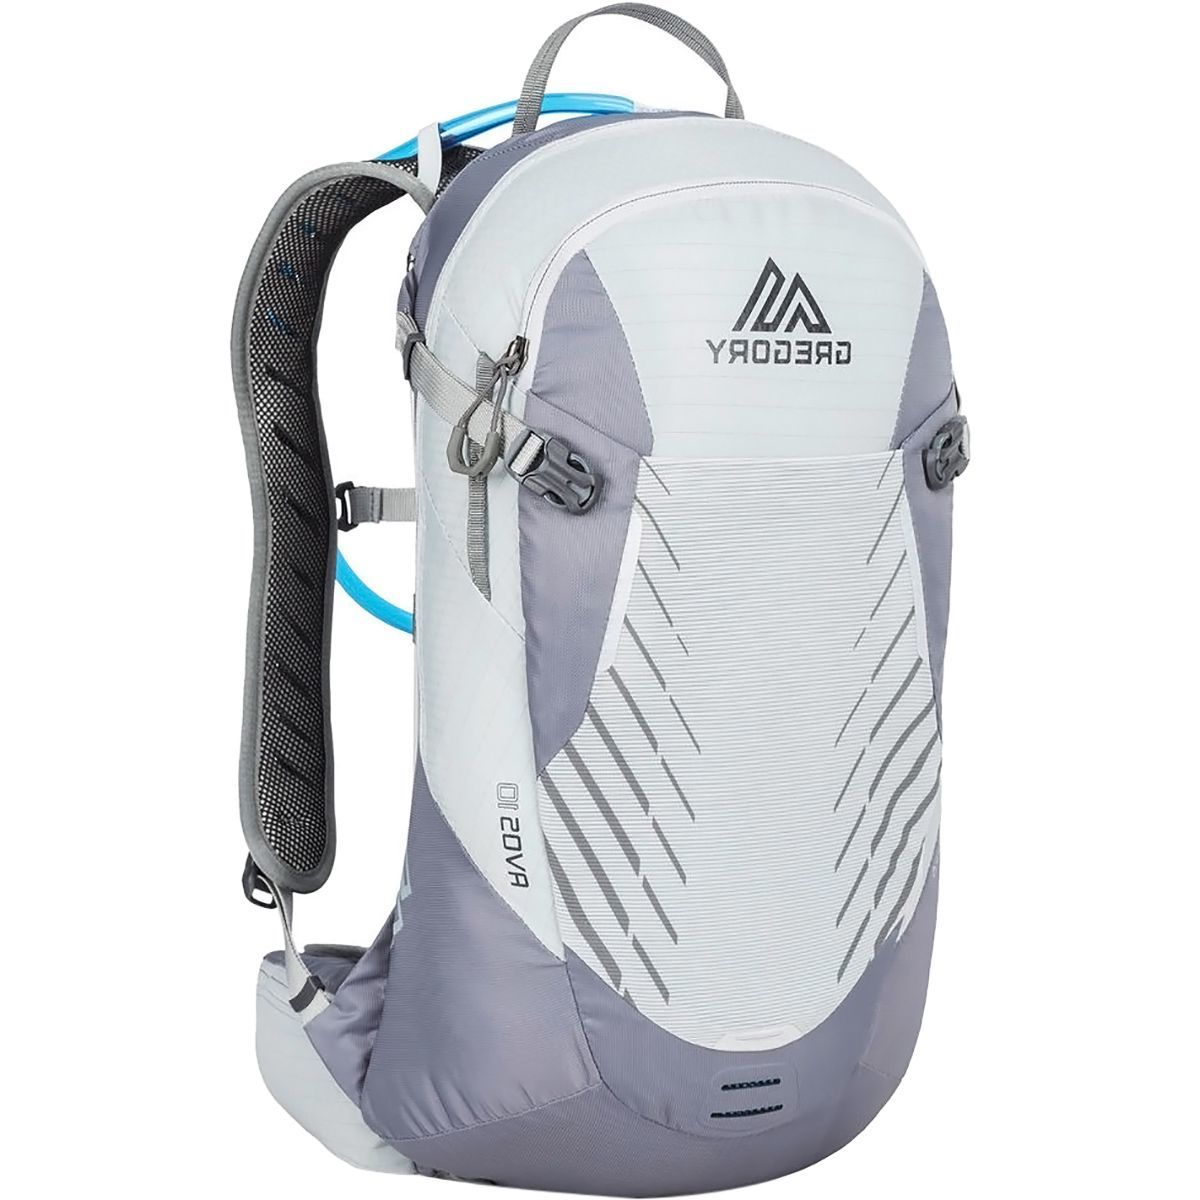 Gregory Avos 10L Hydration Backpack - Women's